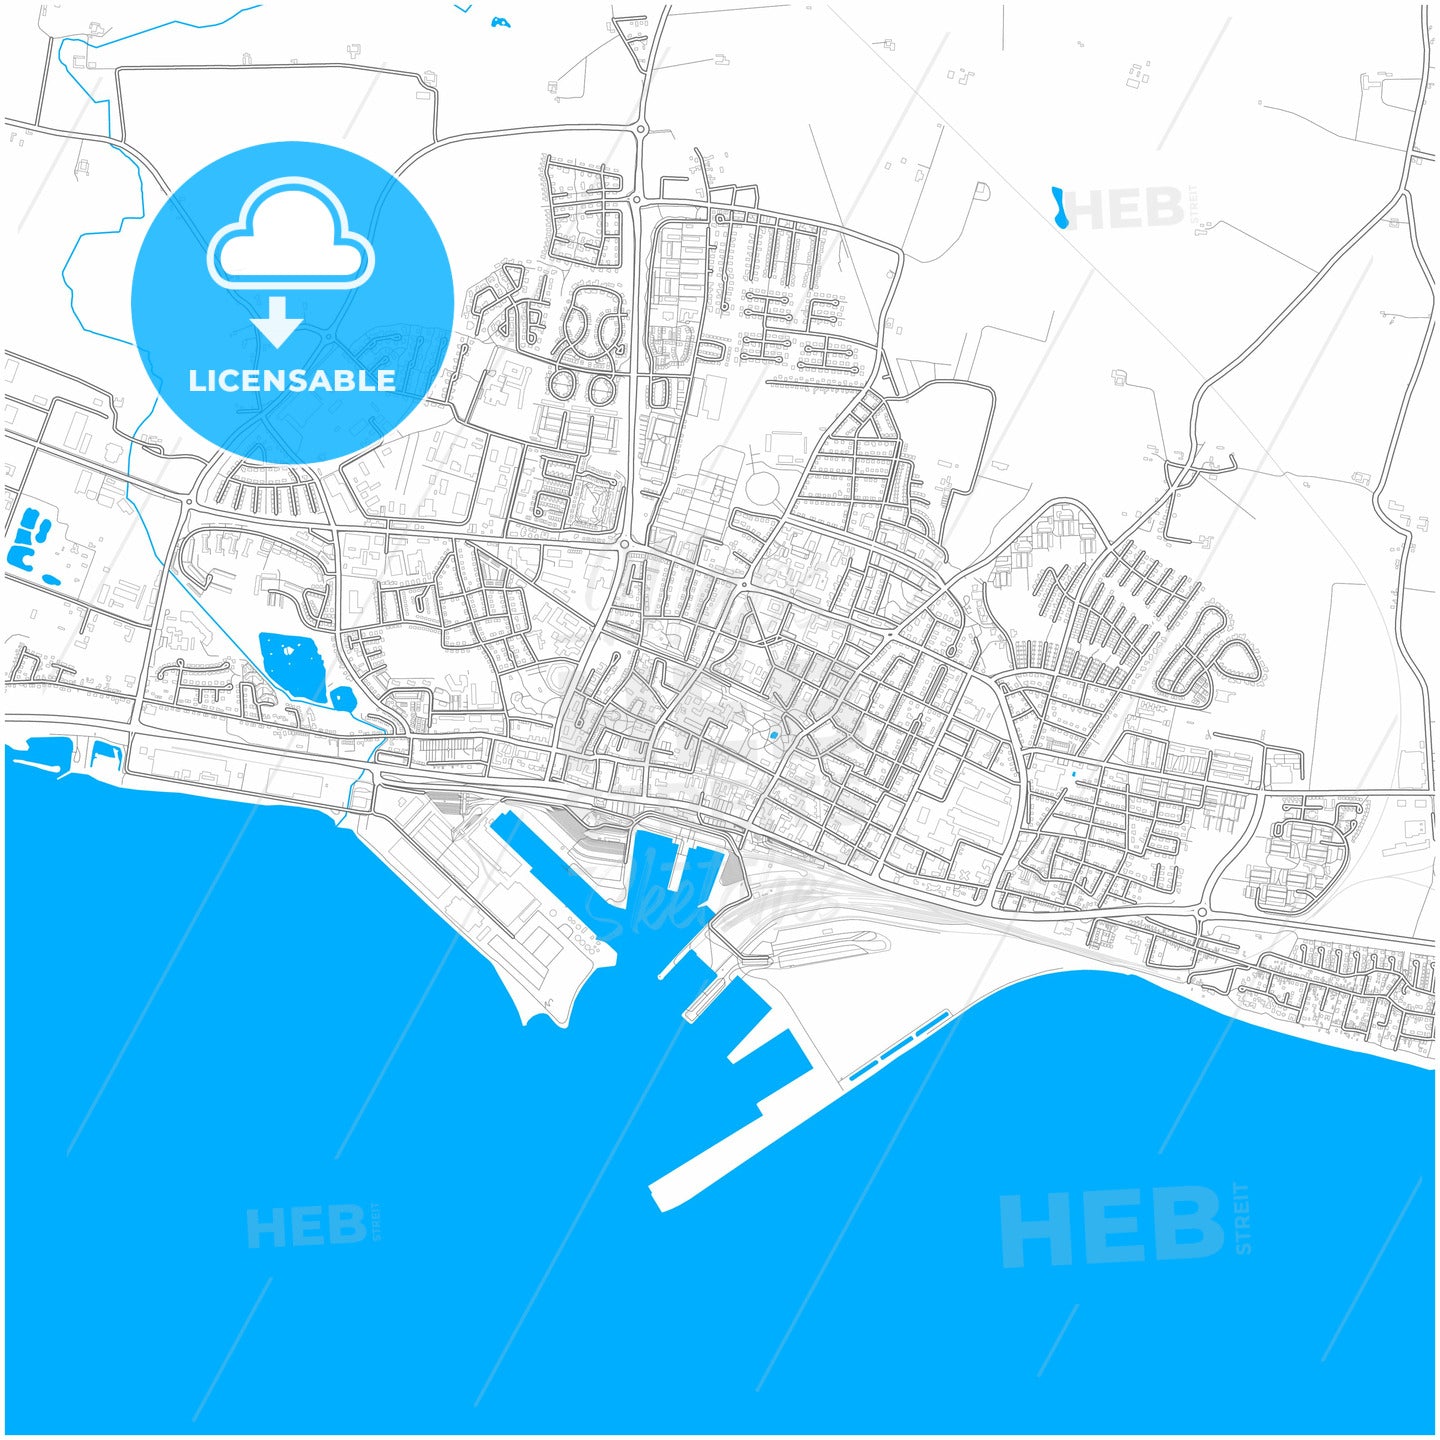 Trelleborg, Sweden, city map with high quality roads.